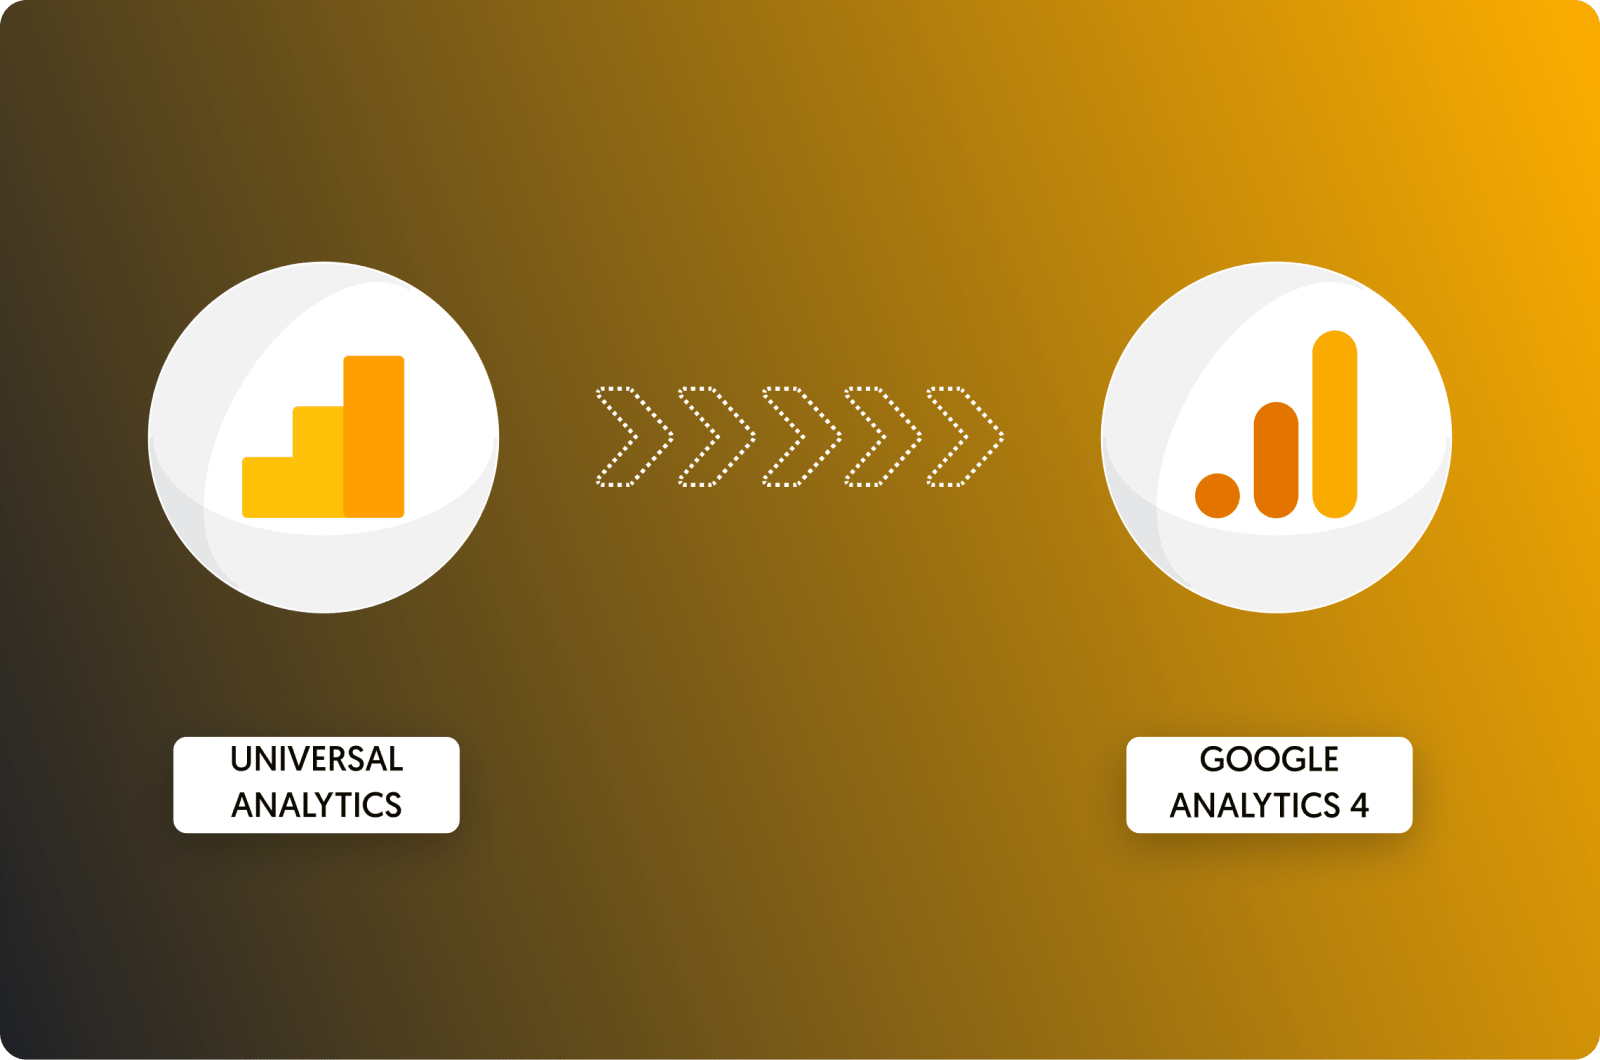 How to Compare Reports from Universal Analytics with Reports from Google Analytics 4